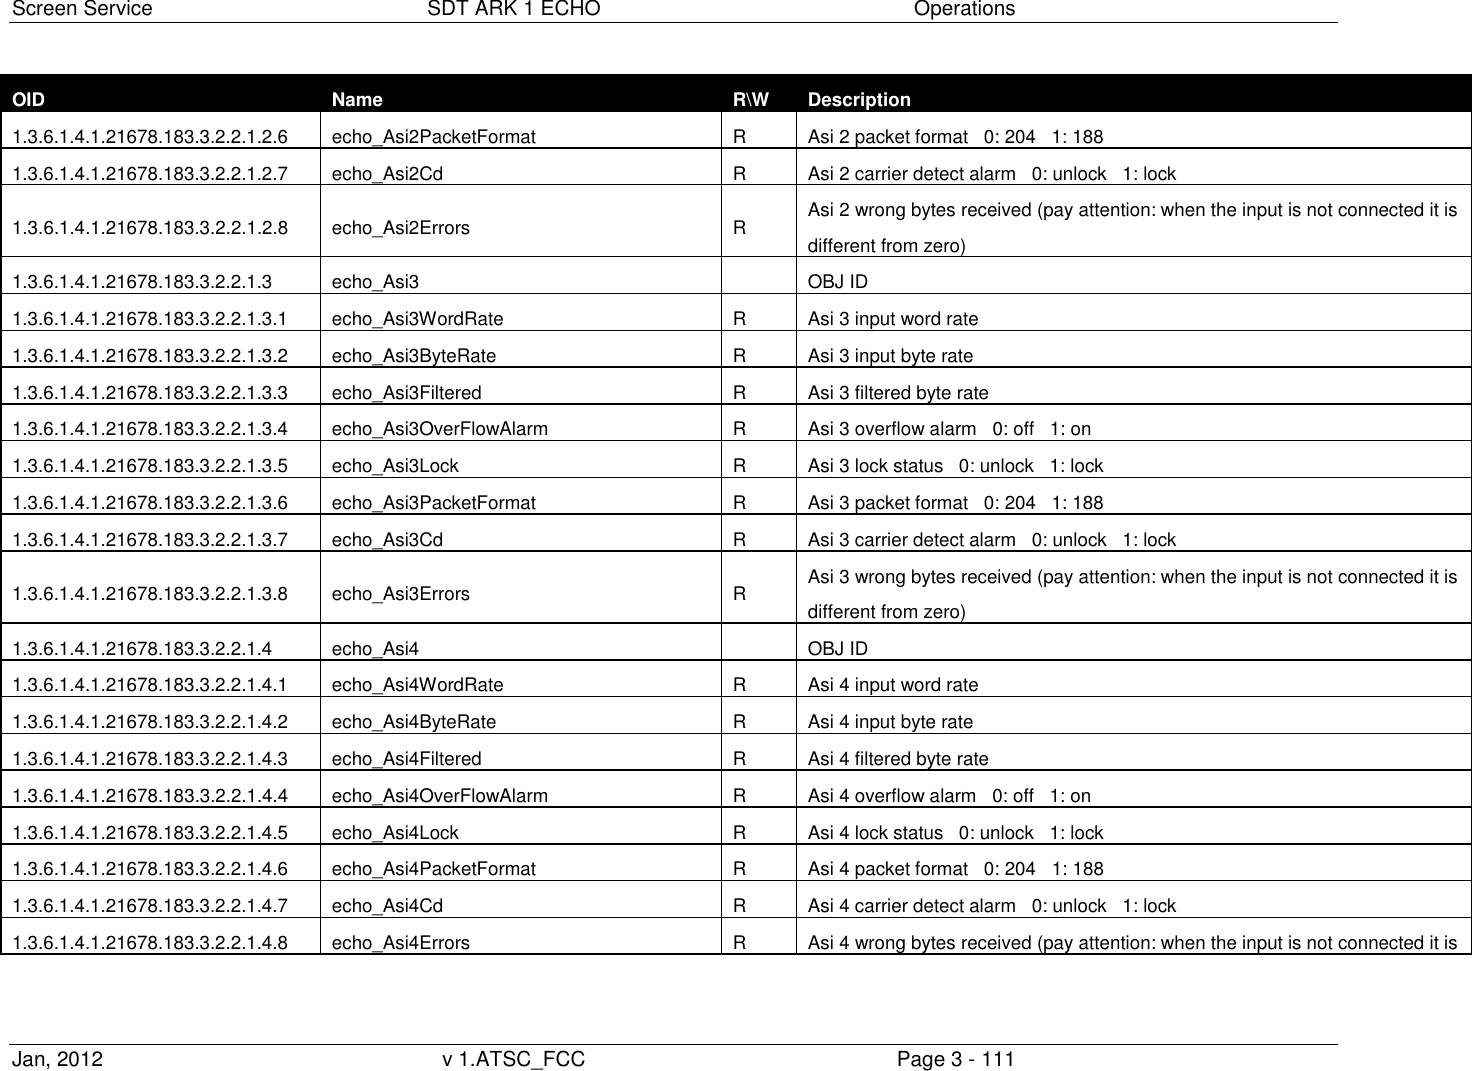 Screen Service  SDT ARK 1 ECHO  Operations Jan, 2012  v 1.ATSC_FCC  Page 3 - 111 OID Name R\W Description 1.3.6.1.4.1.21678.183.3.2.2.1.2.6 echo_Asi2PacketFormat R Asi 2 packet format   0: 204   1: 188 1.3.6.1.4.1.21678.183.3.2.2.1.2.7 echo_Asi2Cd R Asi 2 carrier detect alarm   0: unlock   1: lock 1.3.6.1.4.1.21678.183.3.2.2.1.2.8 echo_Asi2Errors R Asi 2 wrong bytes received (pay attention: when the input is not connected it is different from zero) 1.3.6.1.4.1.21678.183.3.2.2.1.3 echo_Asi3  OBJ ID 1.3.6.1.4.1.21678.183.3.2.2.1.3.1 echo_Asi3WordRate R Asi 3 input word rate 1.3.6.1.4.1.21678.183.3.2.2.1.3.2 echo_Asi3ByteRate R Asi 3 input byte rate 1.3.6.1.4.1.21678.183.3.2.2.1.3.3 echo_Asi3Filtered R Asi 3 filtered byte rate 1.3.6.1.4.1.21678.183.3.2.2.1.3.4 echo_Asi3OverFlowAlarm R Asi 3 overflow alarm   0: off   1: on 1.3.6.1.4.1.21678.183.3.2.2.1.3.5 echo_Asi3Lock R Asi 3 lock status   0: unlock   1: lock 1.3.6.1.4.1.21678.183.3.2.2.1.3.6 echo_Asi3PacketFormat R Asi 3 packet format   0: 204   1: 188 1.3.6.1.4.1.21678.183.3.2.2.1.3.7 echo_Asi3Cd R Asi 3 carrier detect alarm   0: unlock   1: lock 1.3.6.1.4.1.21678.183.3.2.2.1.3.8 echo_Asi3Errors R Asi 3 wrong bytes received (pay attention: when the input is not connected it is different from zero) 1.3.6.1.4.1.21678.183.3.2.2.1.4 echo_Asi4  OBJ ID 1.3.6.1.4.1.21678.183.3.2.2.1.4.1 echo_Asi4WordRate R Asi 4 input word rate 1.3.6.1.4.1.21678.183.3.2.2.1.4.2 echo_Asi4ByteRate R Asi 4 input byte rate 1.3.6.1.4.1.21678.183.3.2.2.1.4.3 echo_Asi4Filtered R Asi 4 filtered byte rate 1.3.6.1.4.1.21678.183.3.2.2.1.4.4 echo_Asi4OverFlowAlarm R Asi 4 overflow alarm   0: off   1: on 1.3.6.1.4.1.21678.183.3.2.2.1.4.5 echo_Asi4Lock R Asi 4 lock status   0: unlock   1: lock 1.3.6.1.4.1.21678.183.3.2.2.1.4.6 echo_Asi4PacketFormat R Asi 4 packet format   0: 204   1: 188 1.3.6.1.4.1.21678.183.3.2.2.1.4.7 echo_Asi4Cd R Asi 4 carrier detect alarm   0: unlock   1: lock 1.3.6.1.4.1.21678.183.3.2.2.1.4.8 echo_Asi4Errors R Asi 4 wrong bytes received (pay attention: when the input is not connected it is 